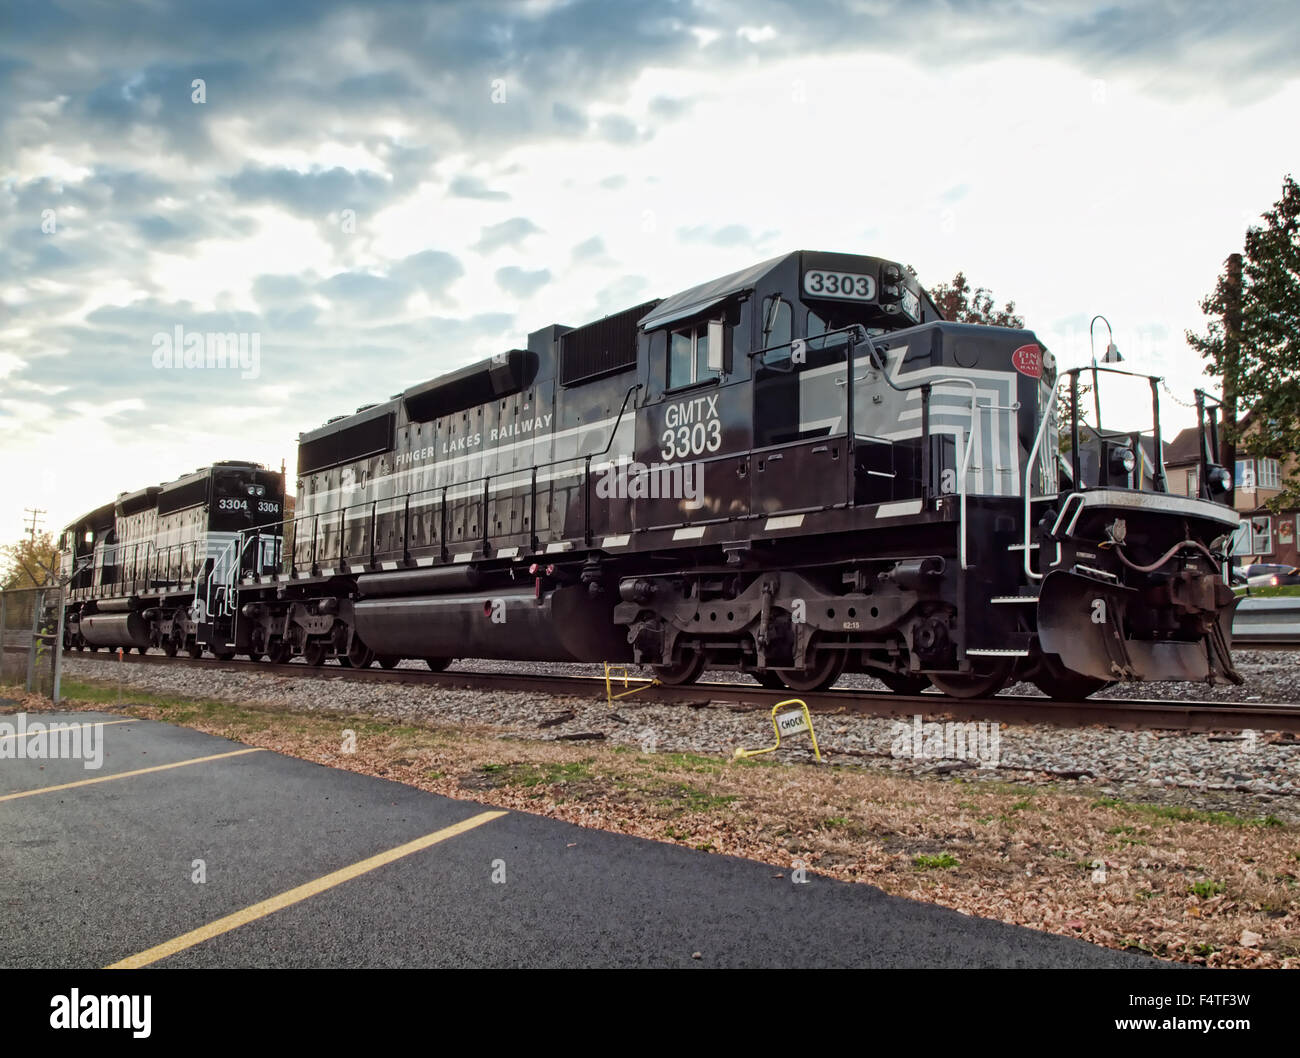 Solvay, New York, USA. October, 22,2015. The Fingerlakes Railway locomotive parked on the railway tracks in front of Chinatown F Stock Photo